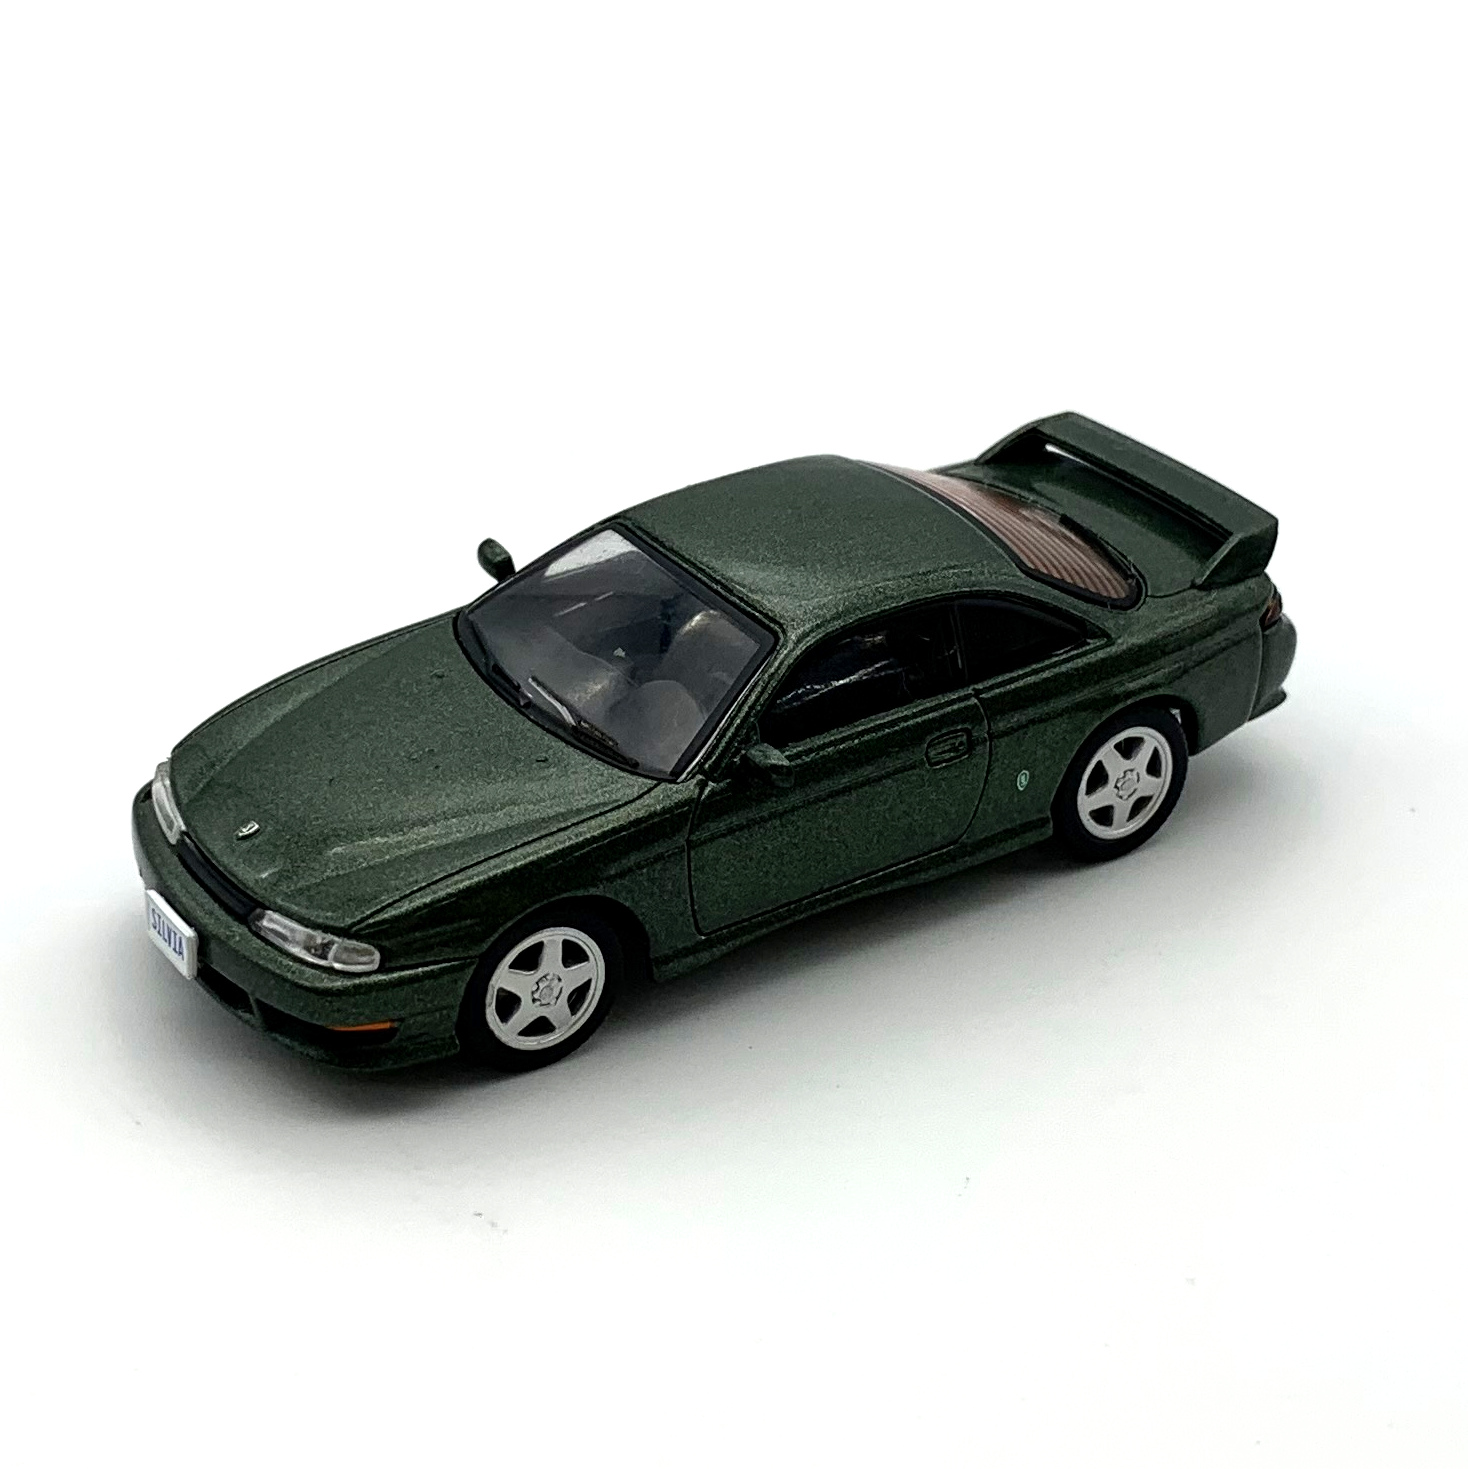 DIECAST MASTERS 日産 シルビア S14 グリーン LHD